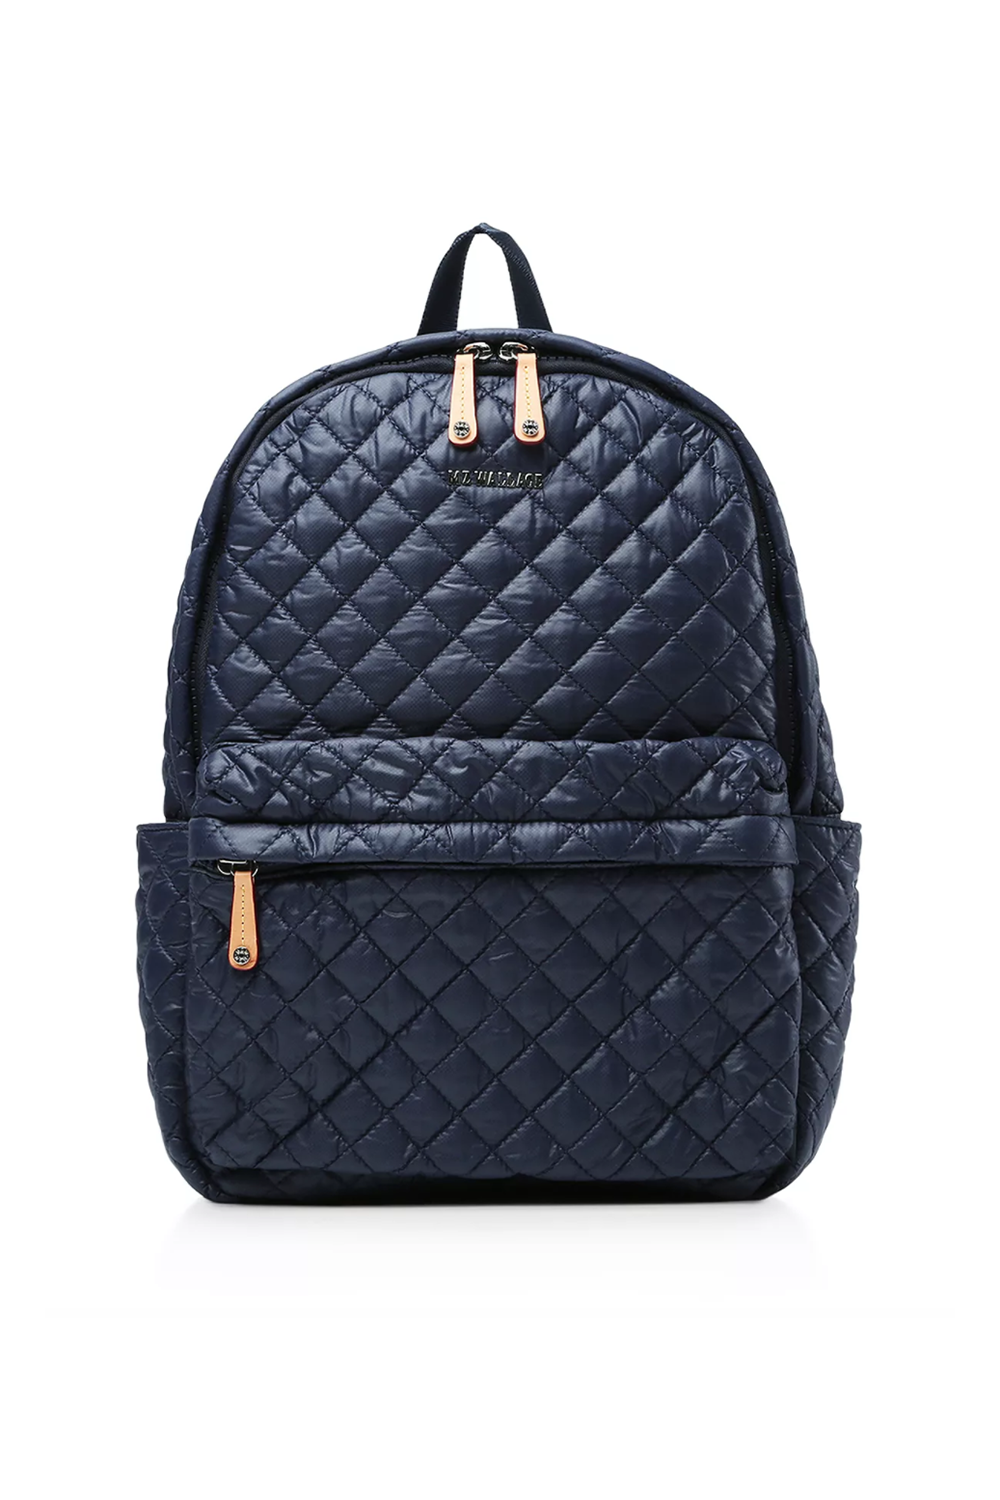 office backpack for ladies